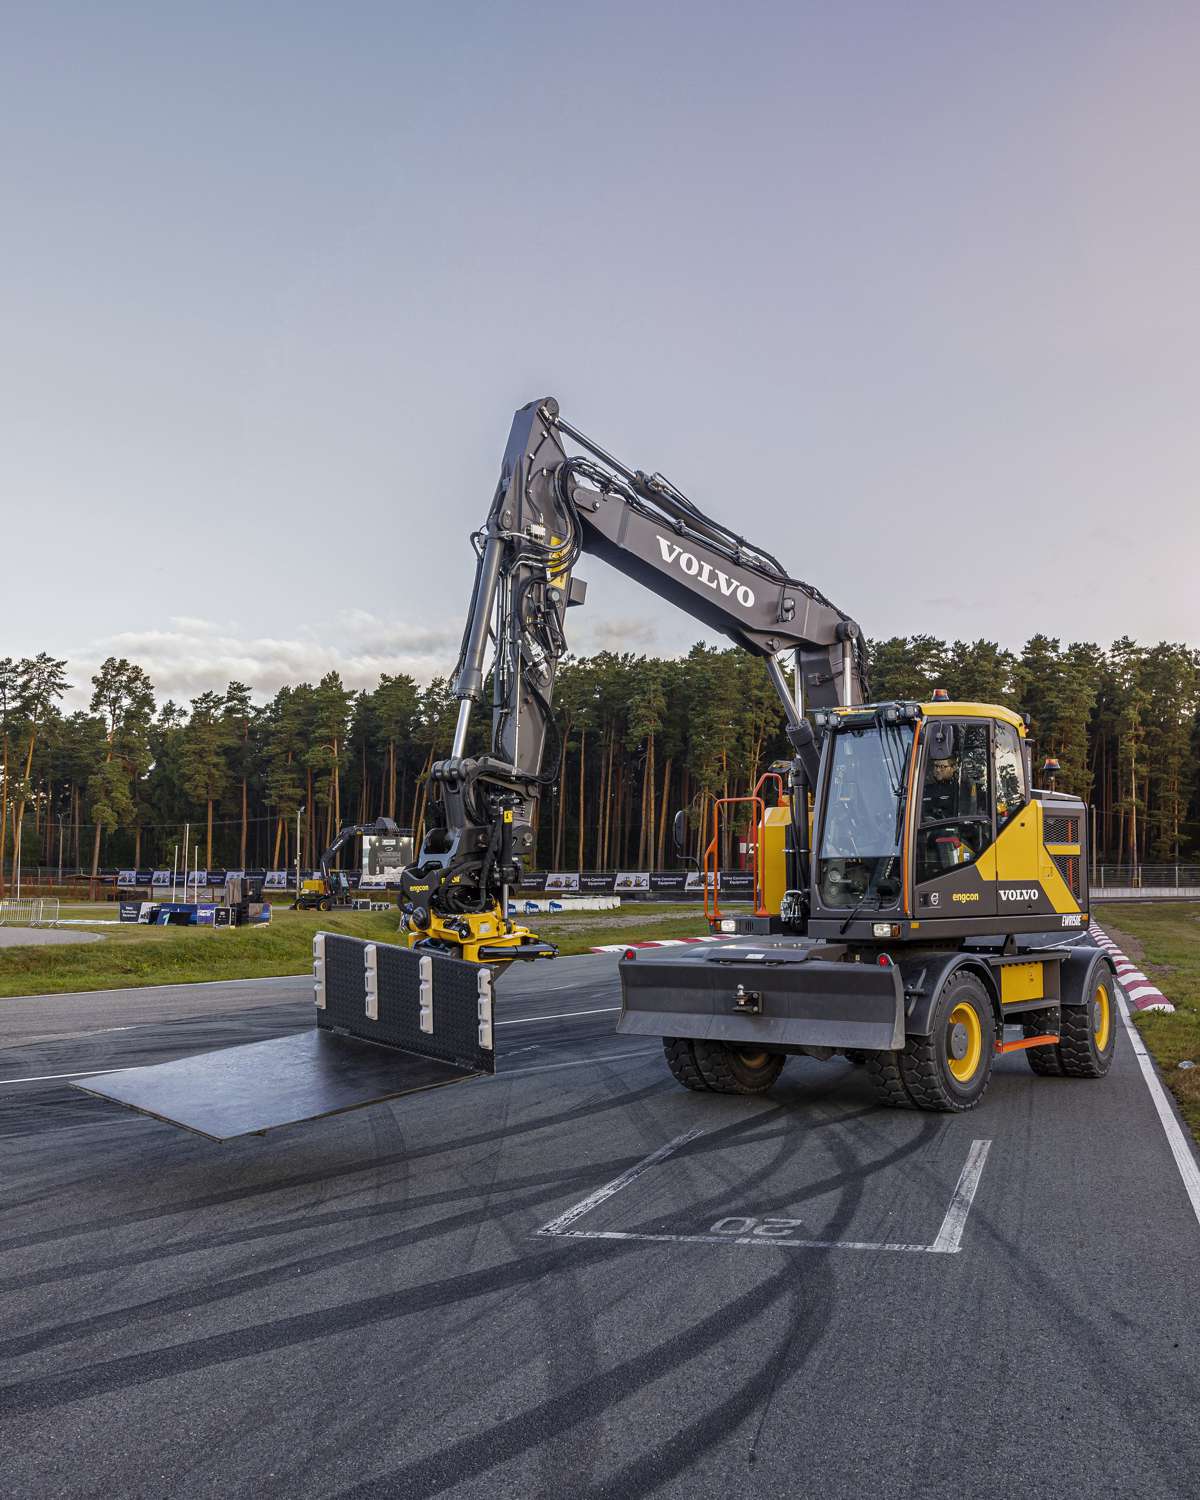 VolvoCE elevates Motorsport Safety with Electric Car Recovery Solution